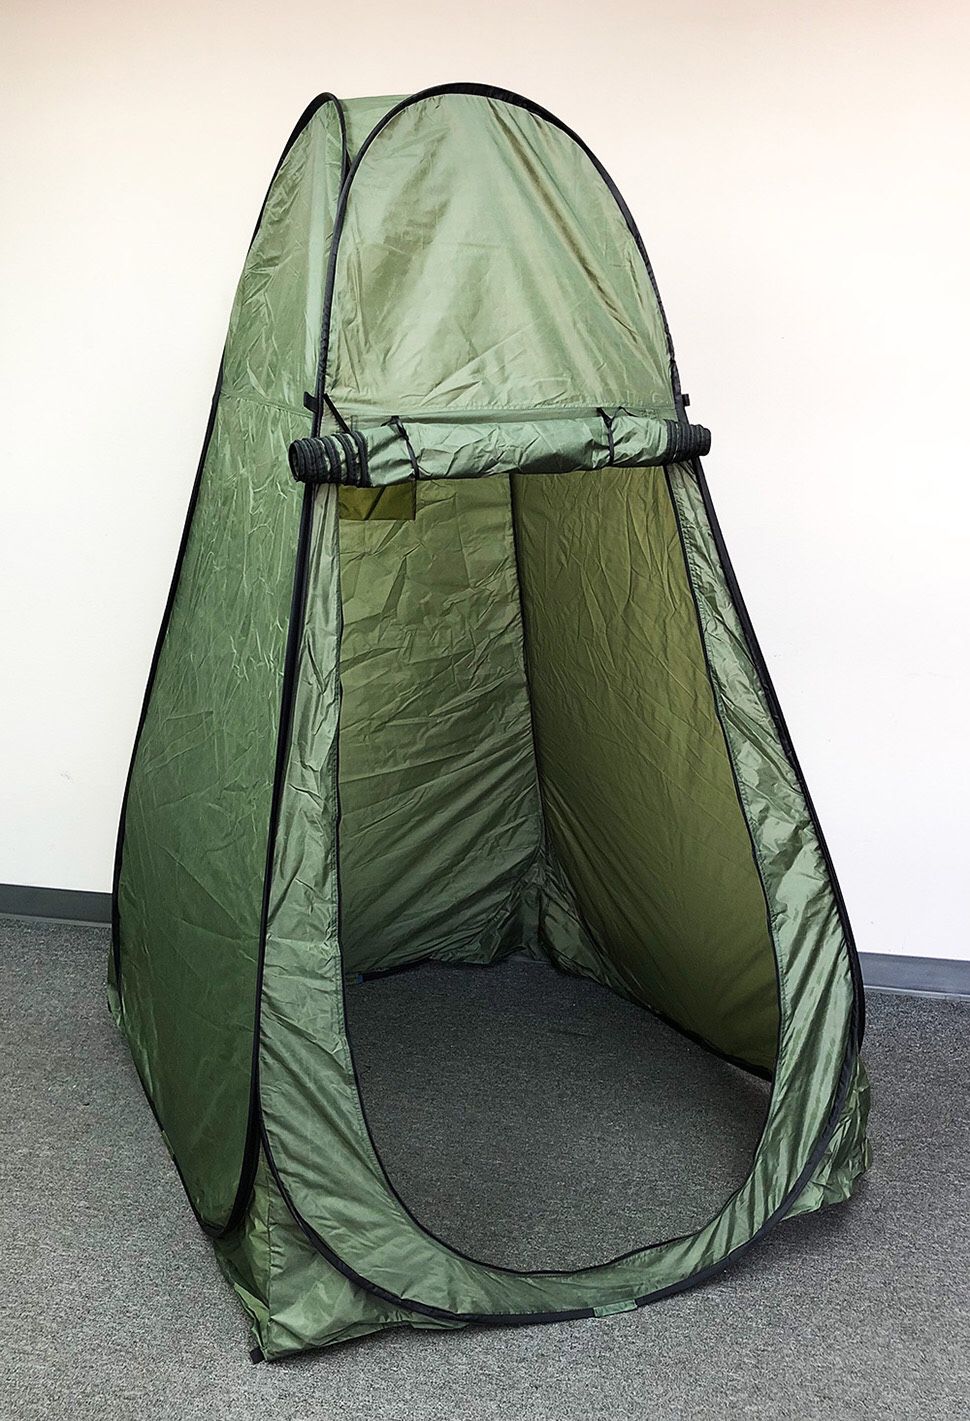 New $30 Portable Camping Hiking Pop Up Tent Shelter Outdoor Shower Bathroom 46”x46”x77”